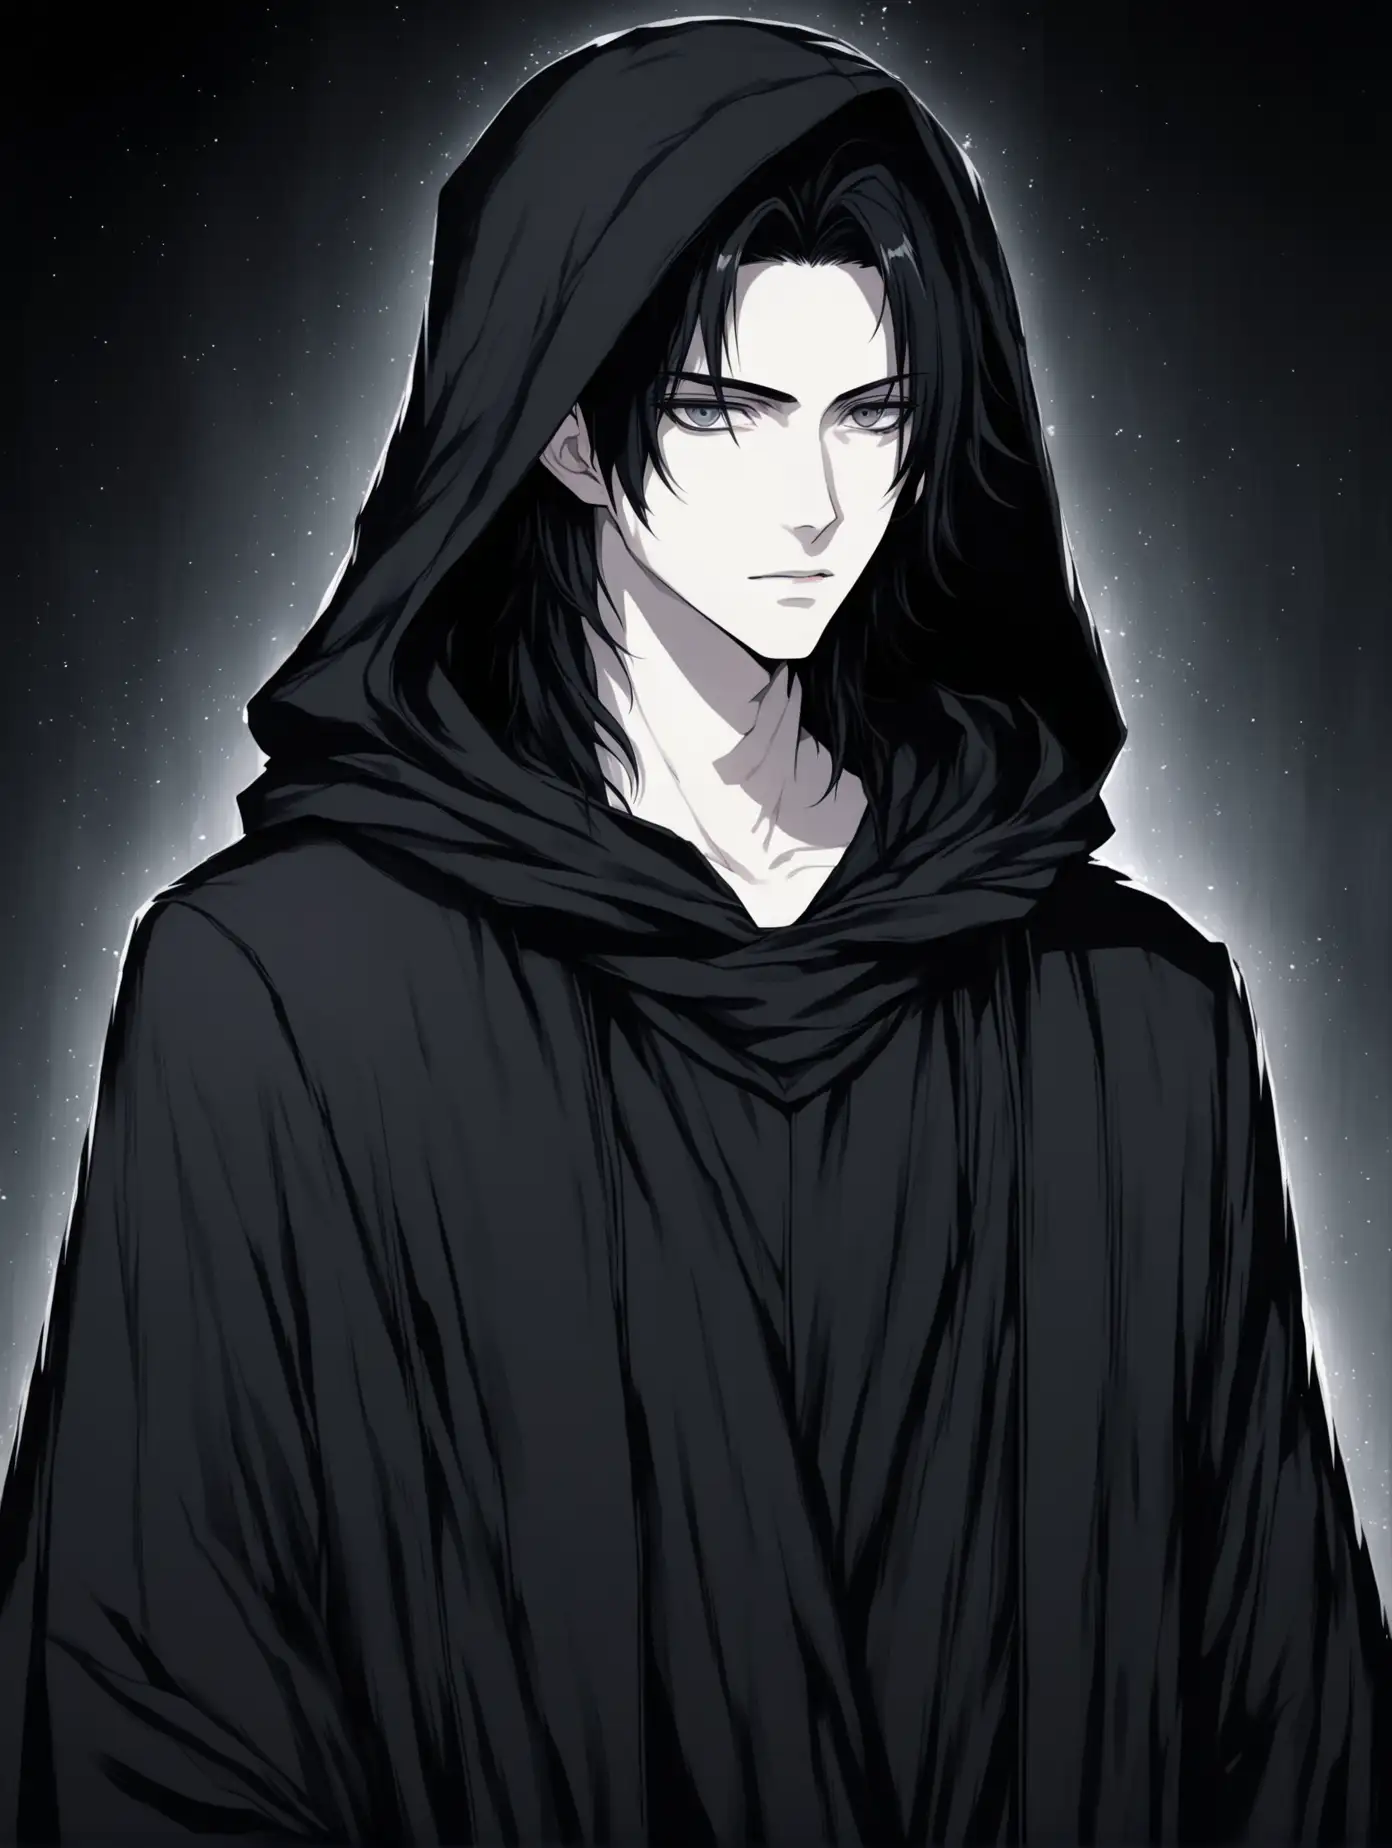 2D anime art. A young man with pale skin, long black hair and dark gray eyes. Dressed in a black robe with a hood. Handsome, thin fit young male. Kind face. 